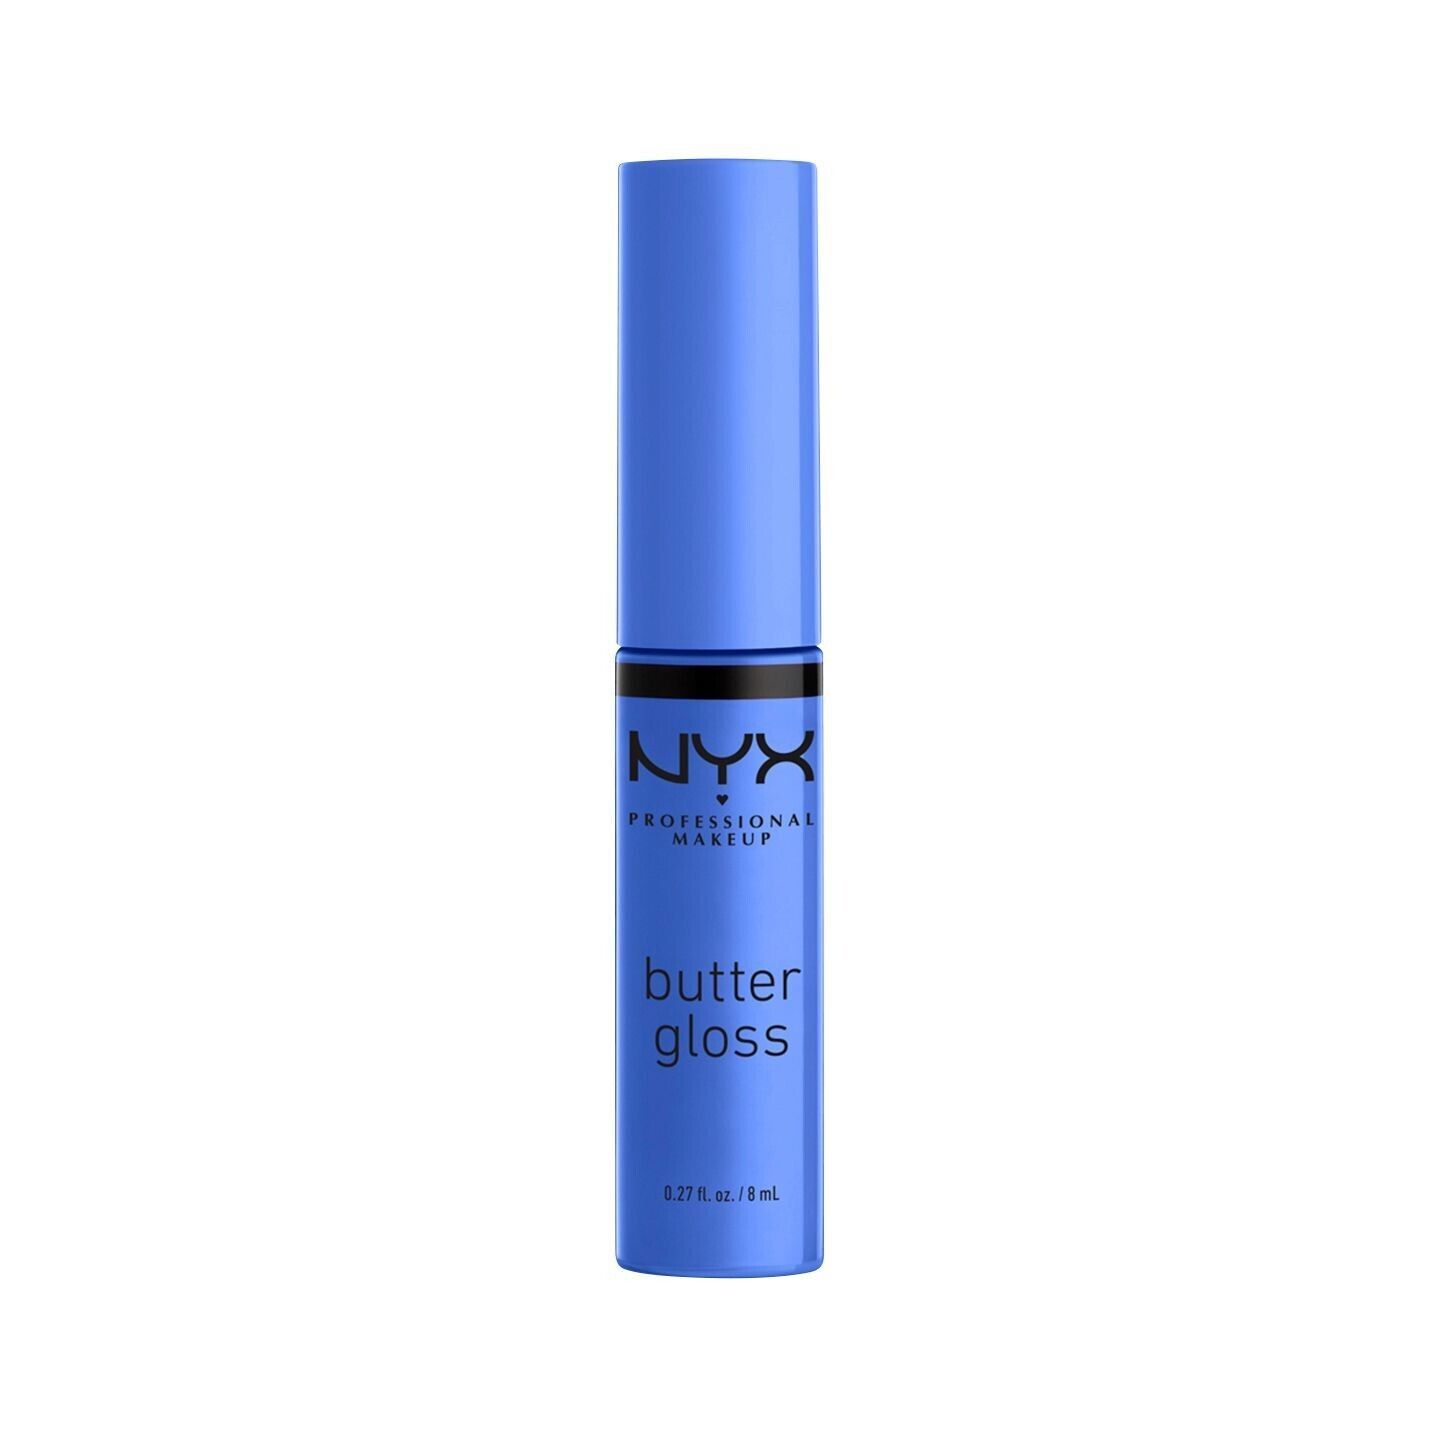 Primary image for NYX Professional Makeup Butter Gloss, Blueberry Tart BLG44, Creamy Lip Gloss